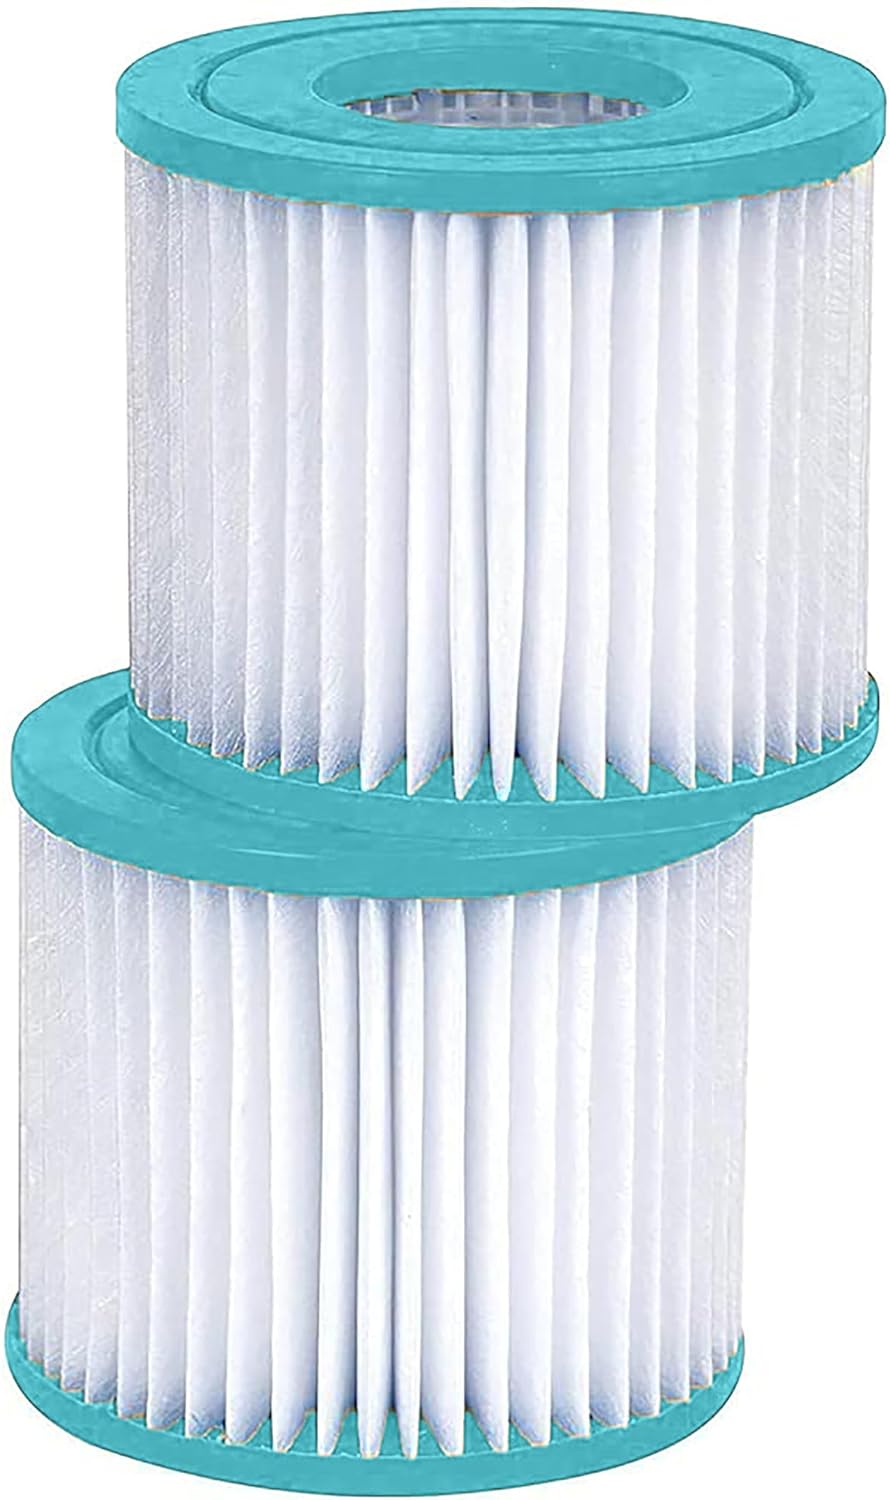 Products – Hurricane Pool Filters